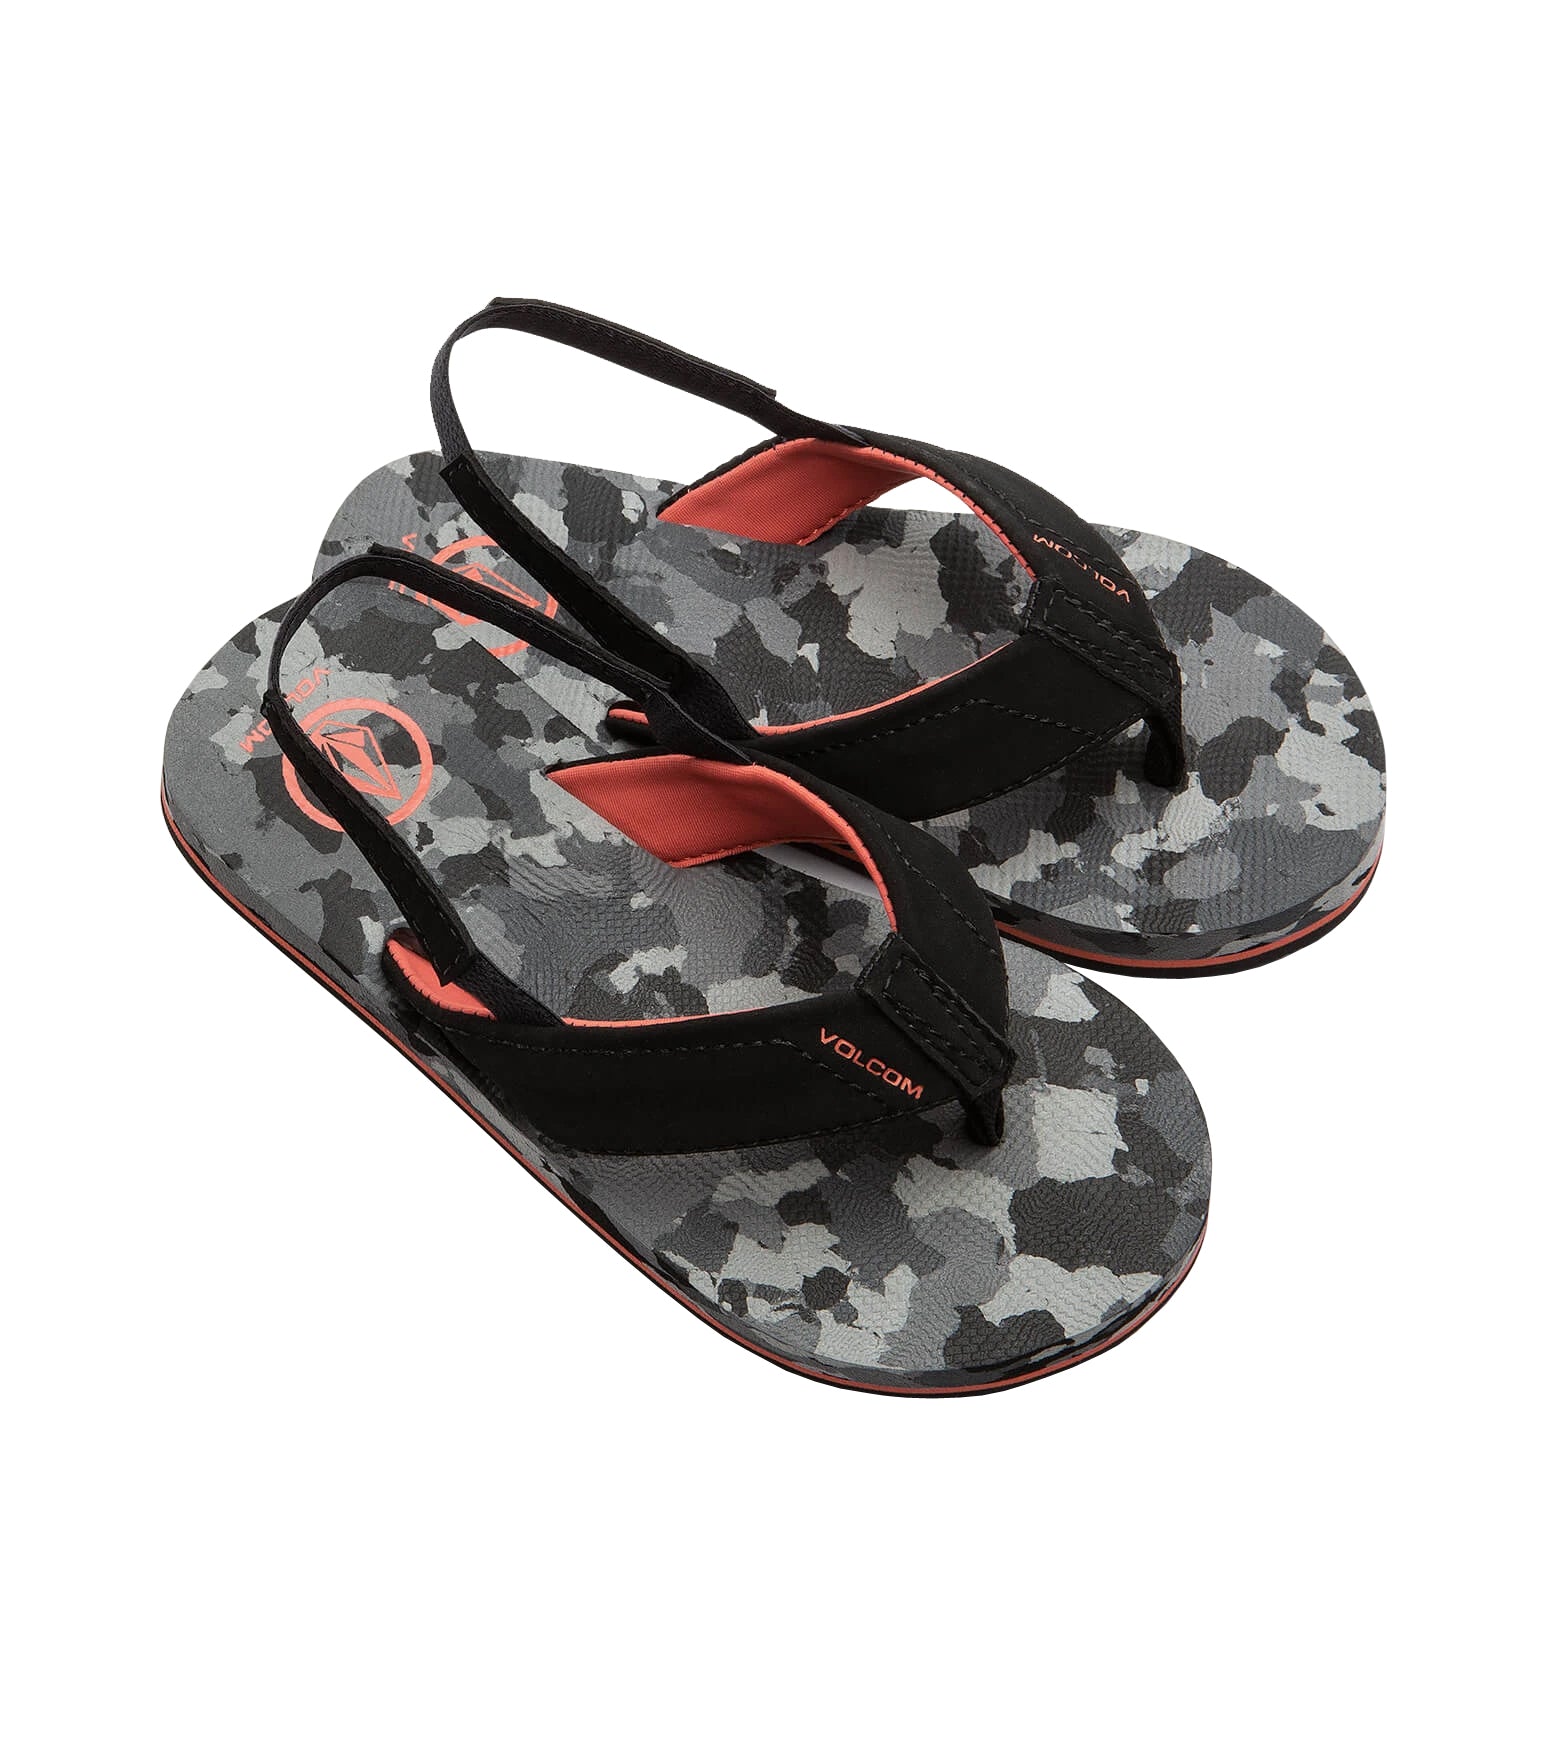 Volcom Victor Little Youth Boys Sandal CAM-Camouflage 9 C